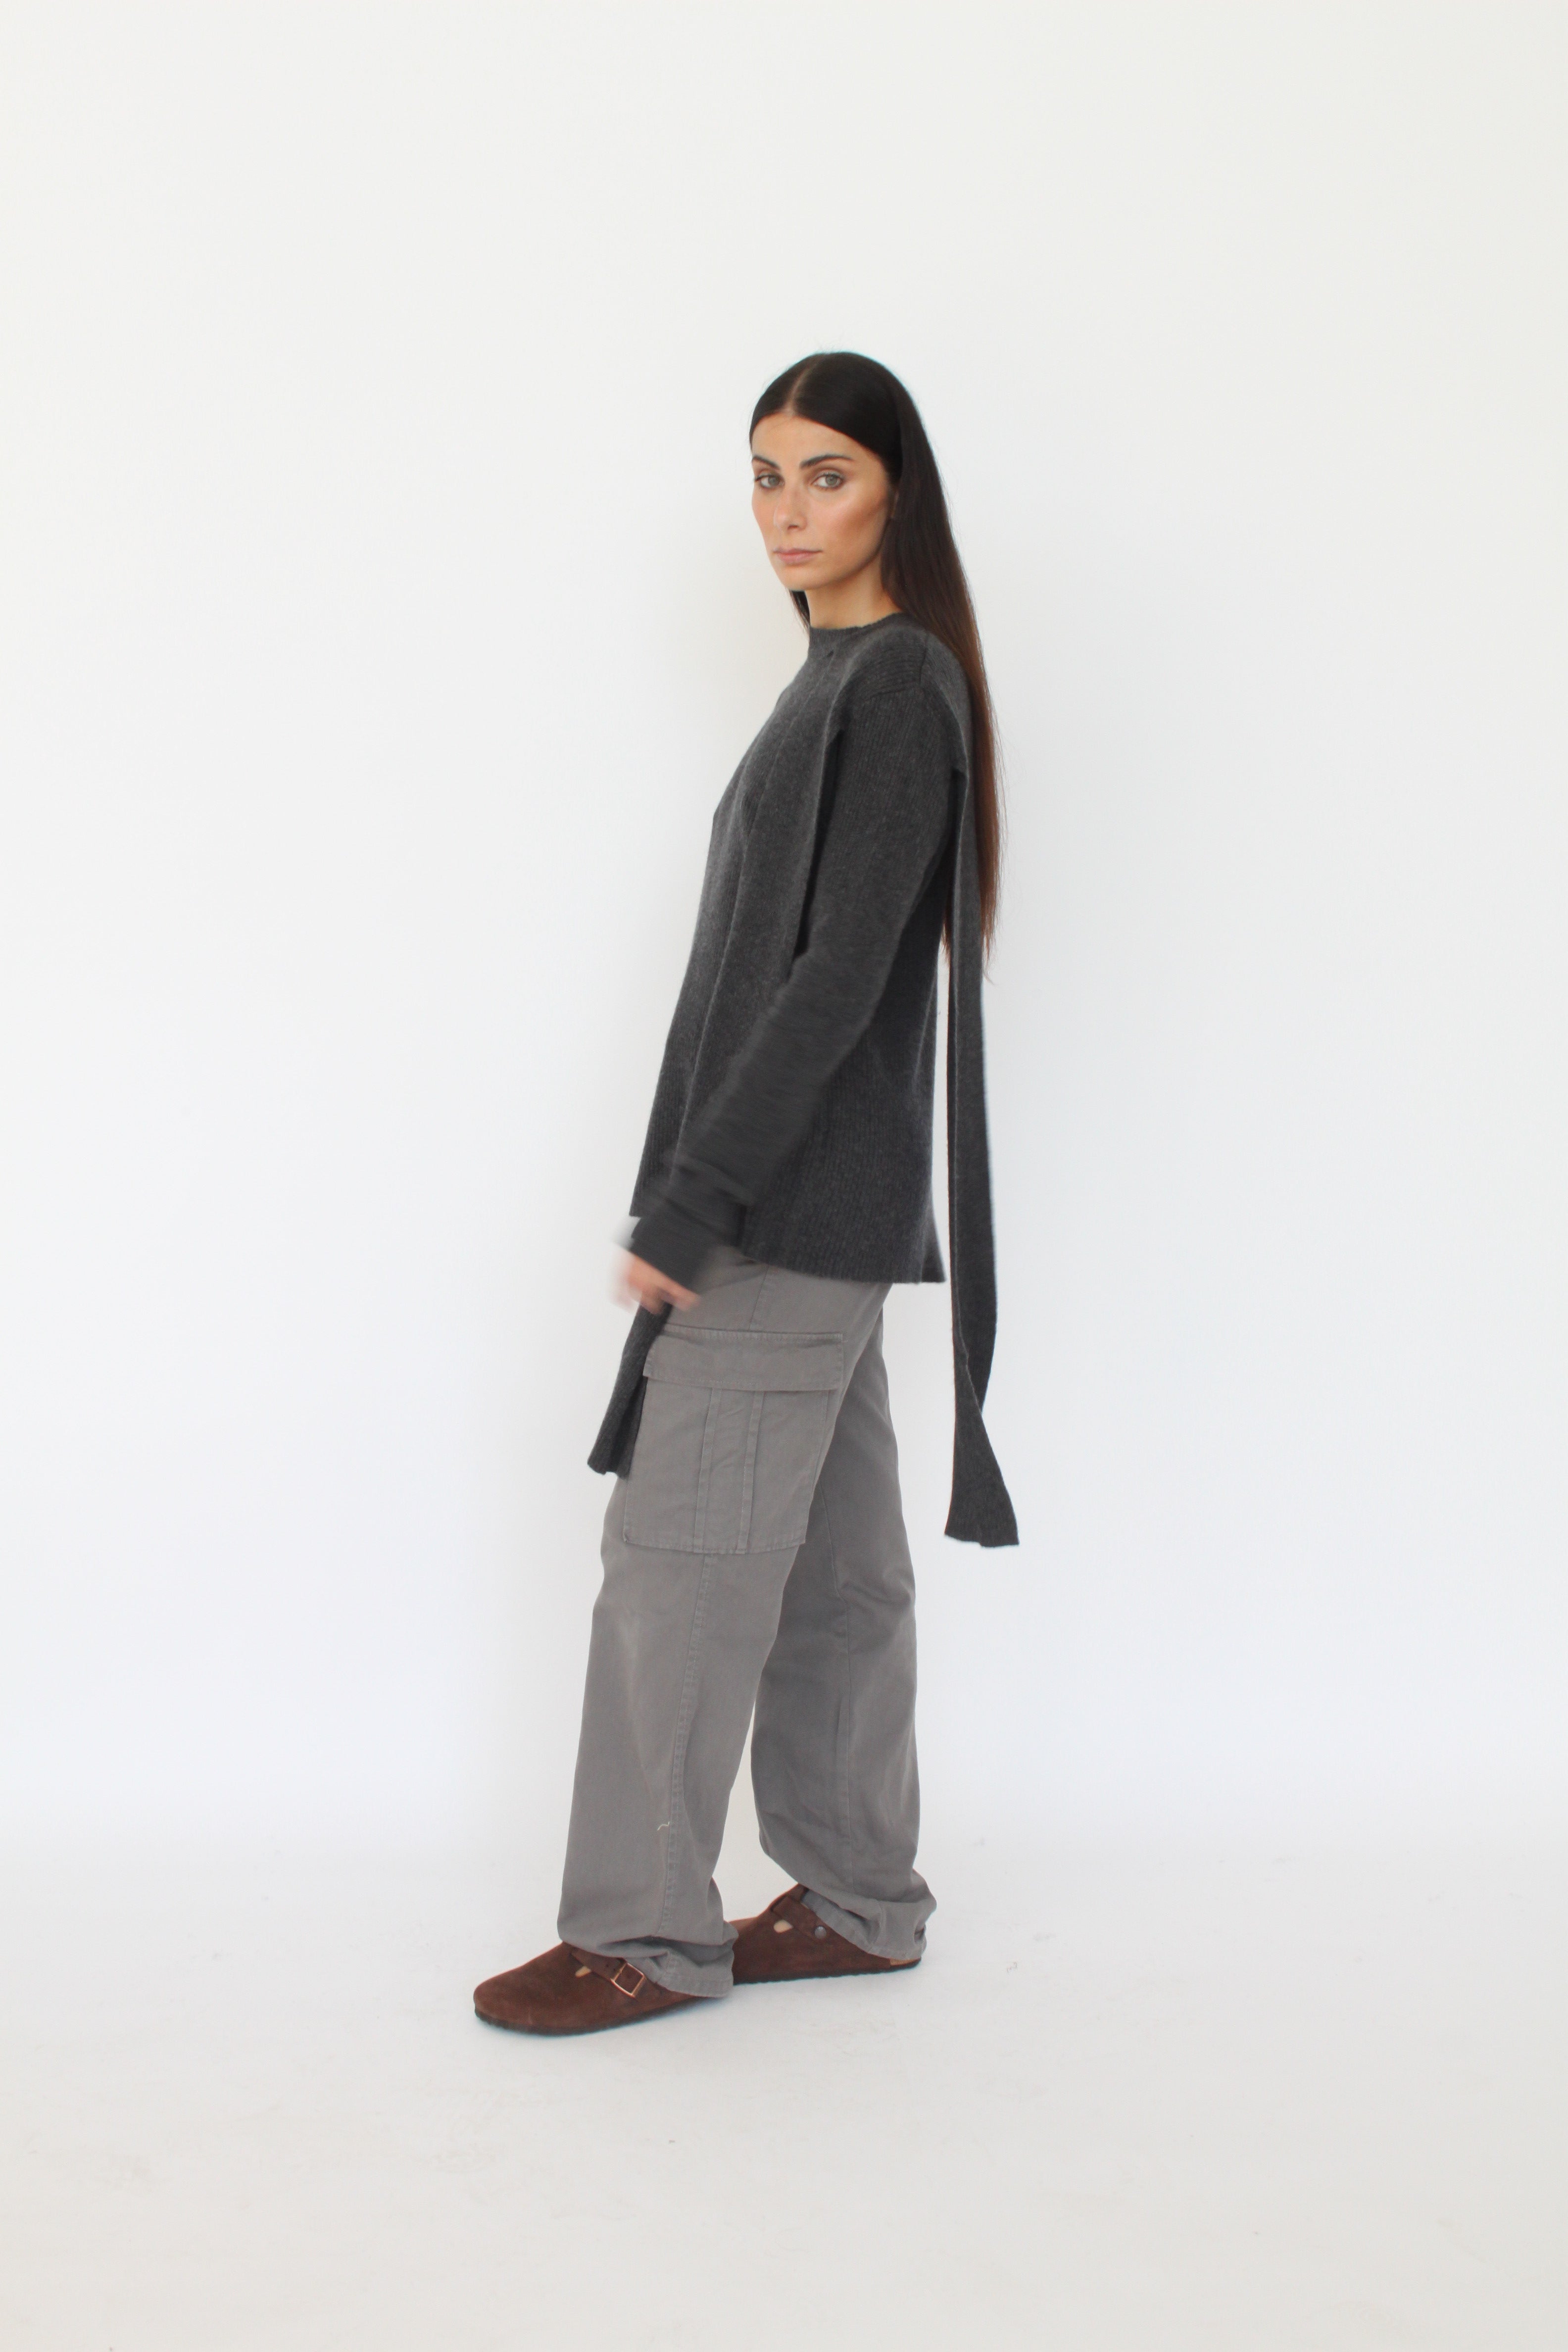 Cashmere blend crewneck with side bow - Antonia